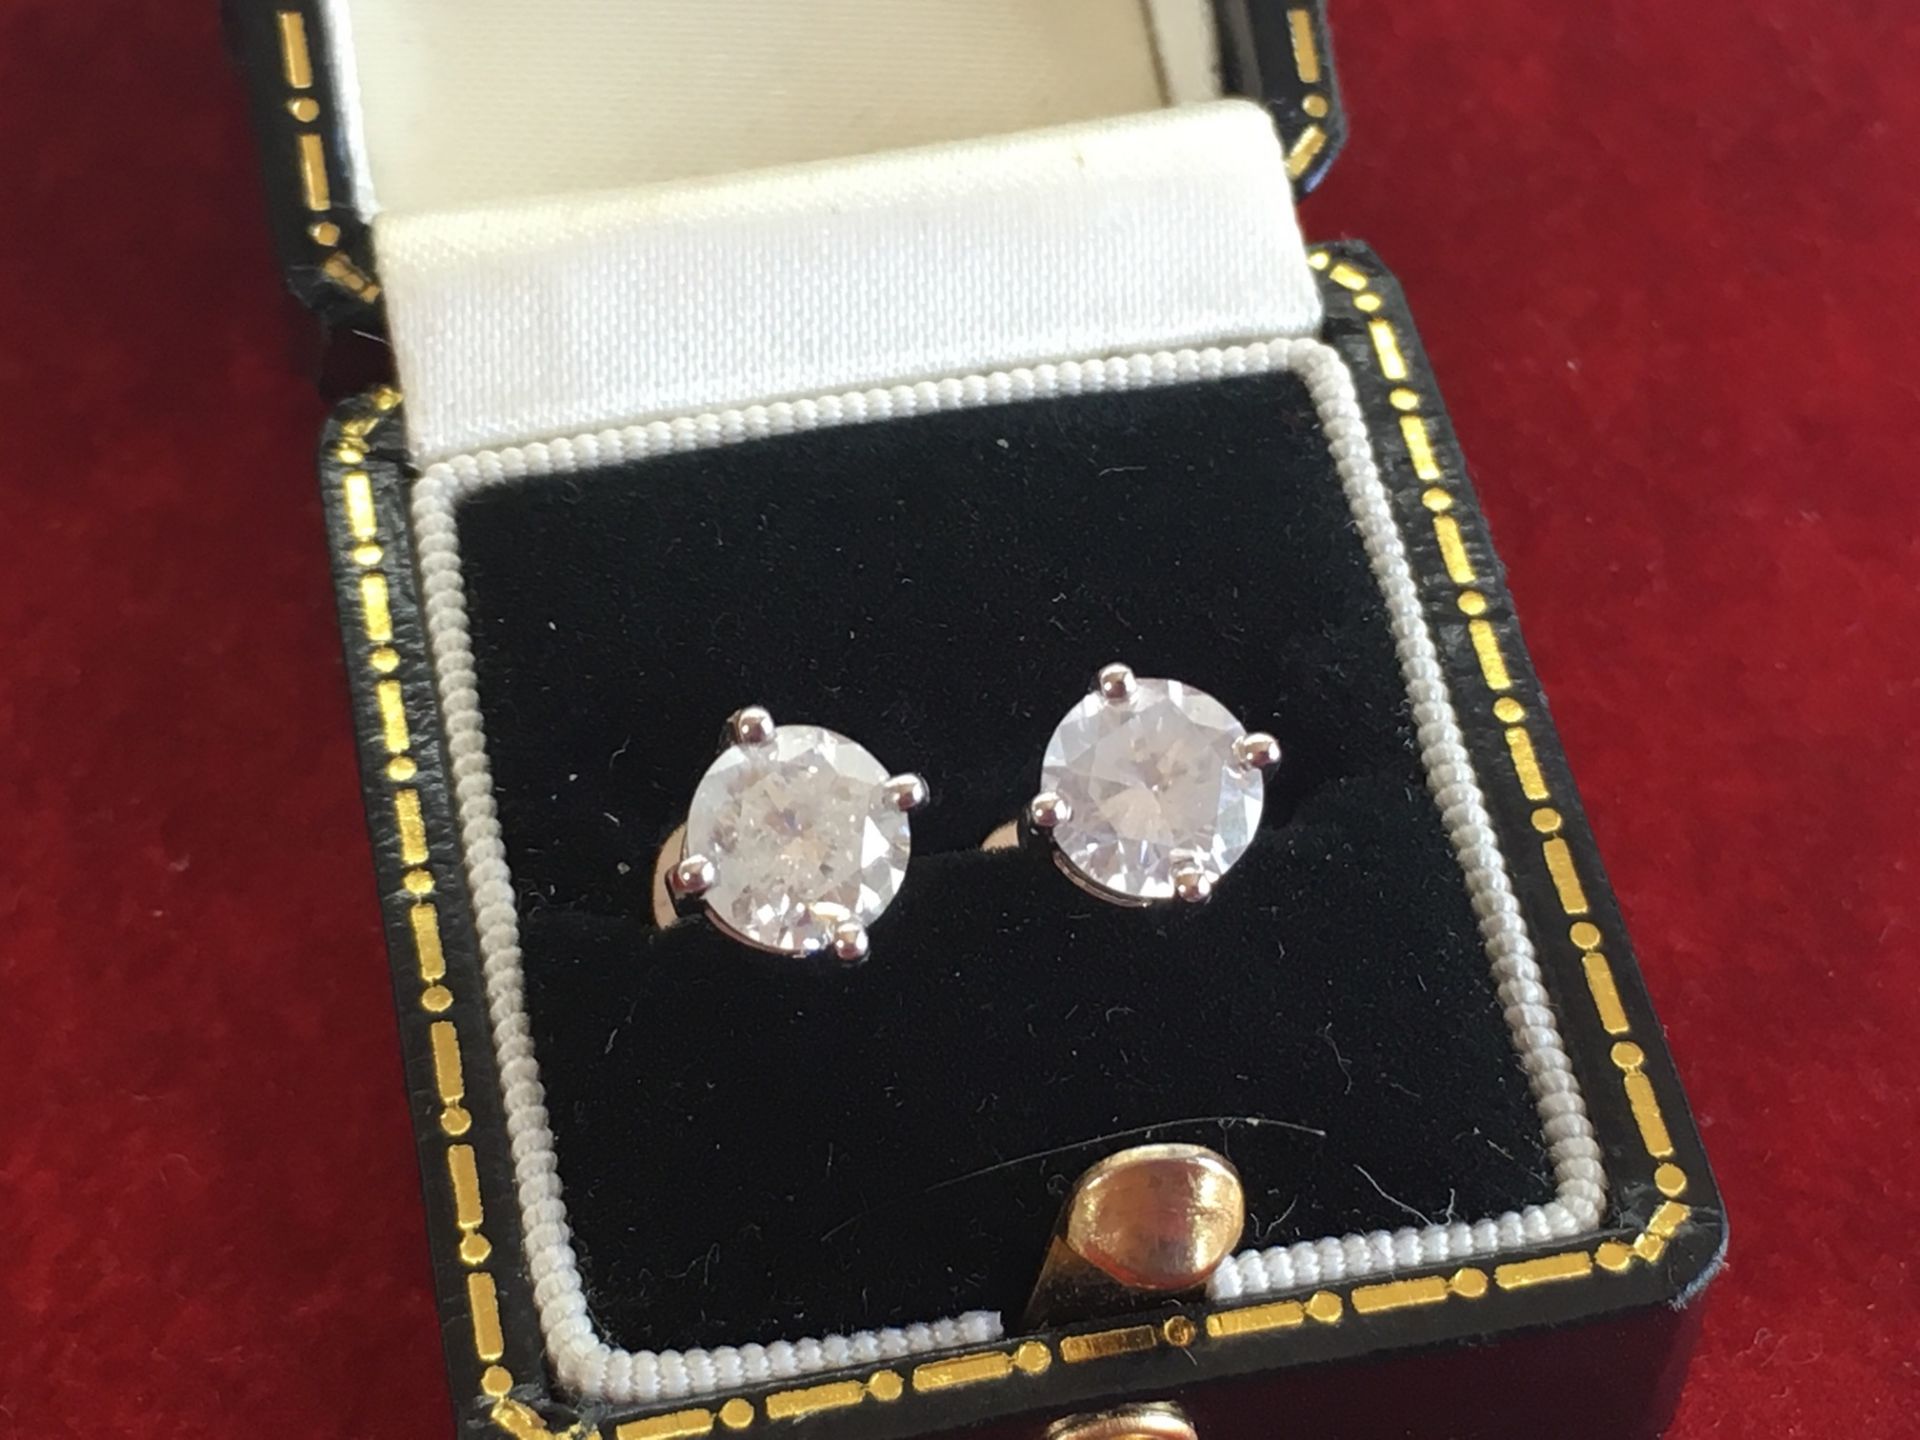 2.00ct DIAMOND SOLITAIRE EARRINGS WITH SCREWBACKS FOR SECURITY (APPROX 1.00ct EACH EARRING)